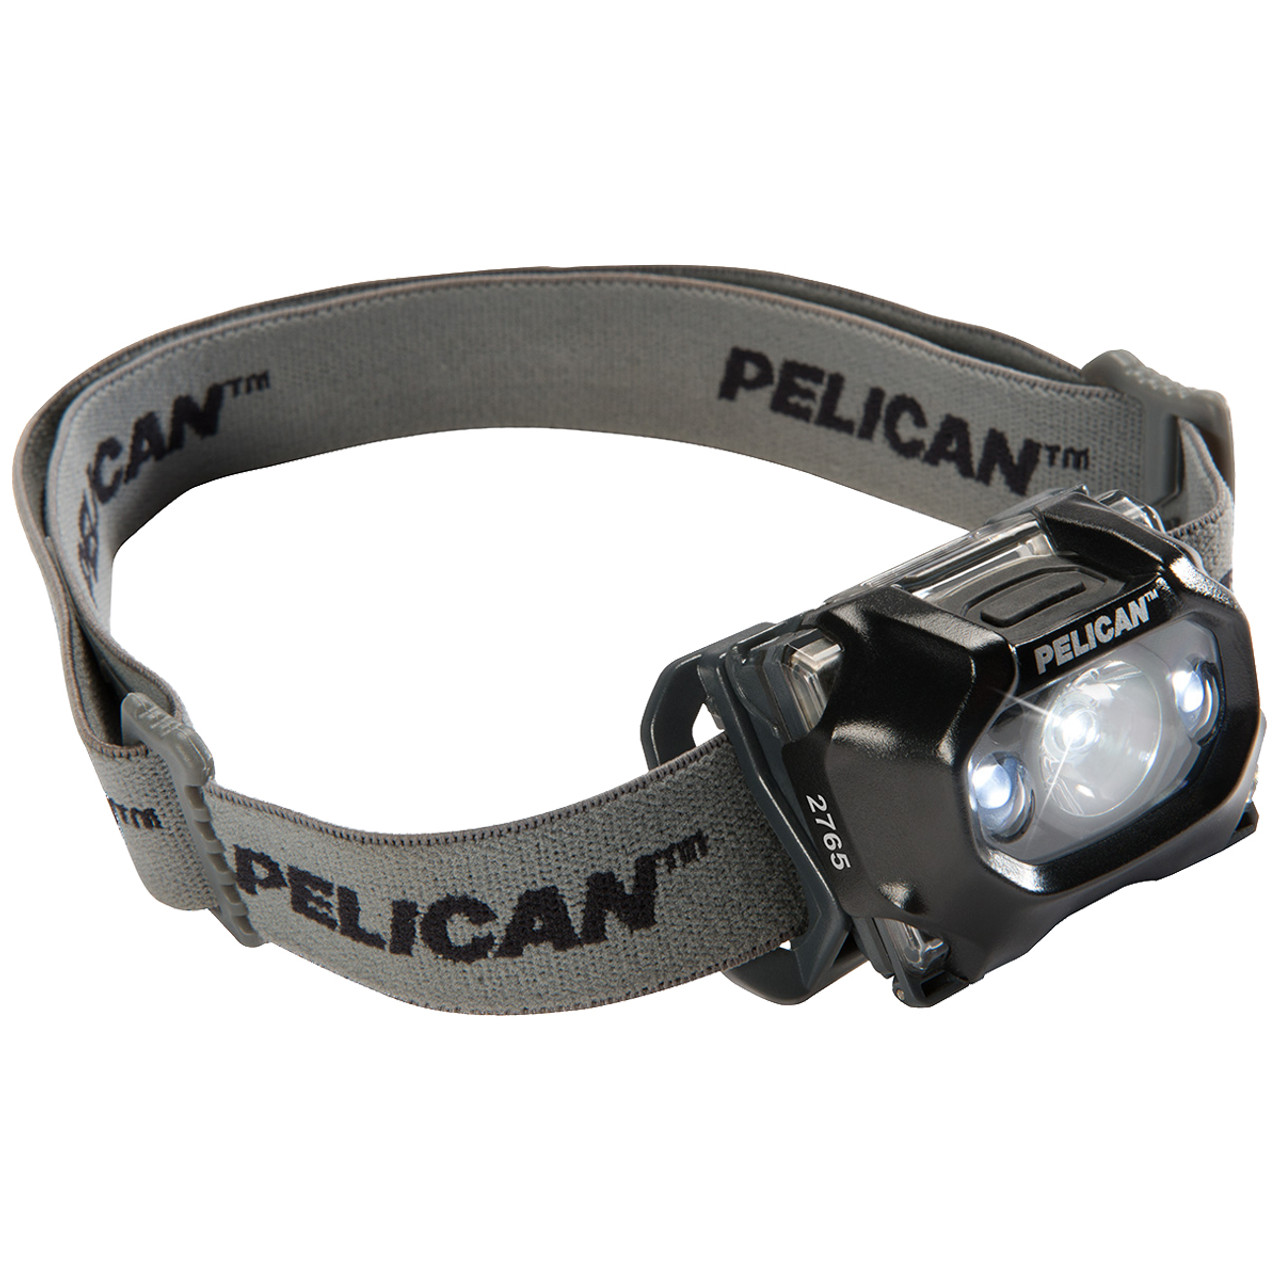 Pelican 2765 LED Headlamp Curtis Tools for Heroes